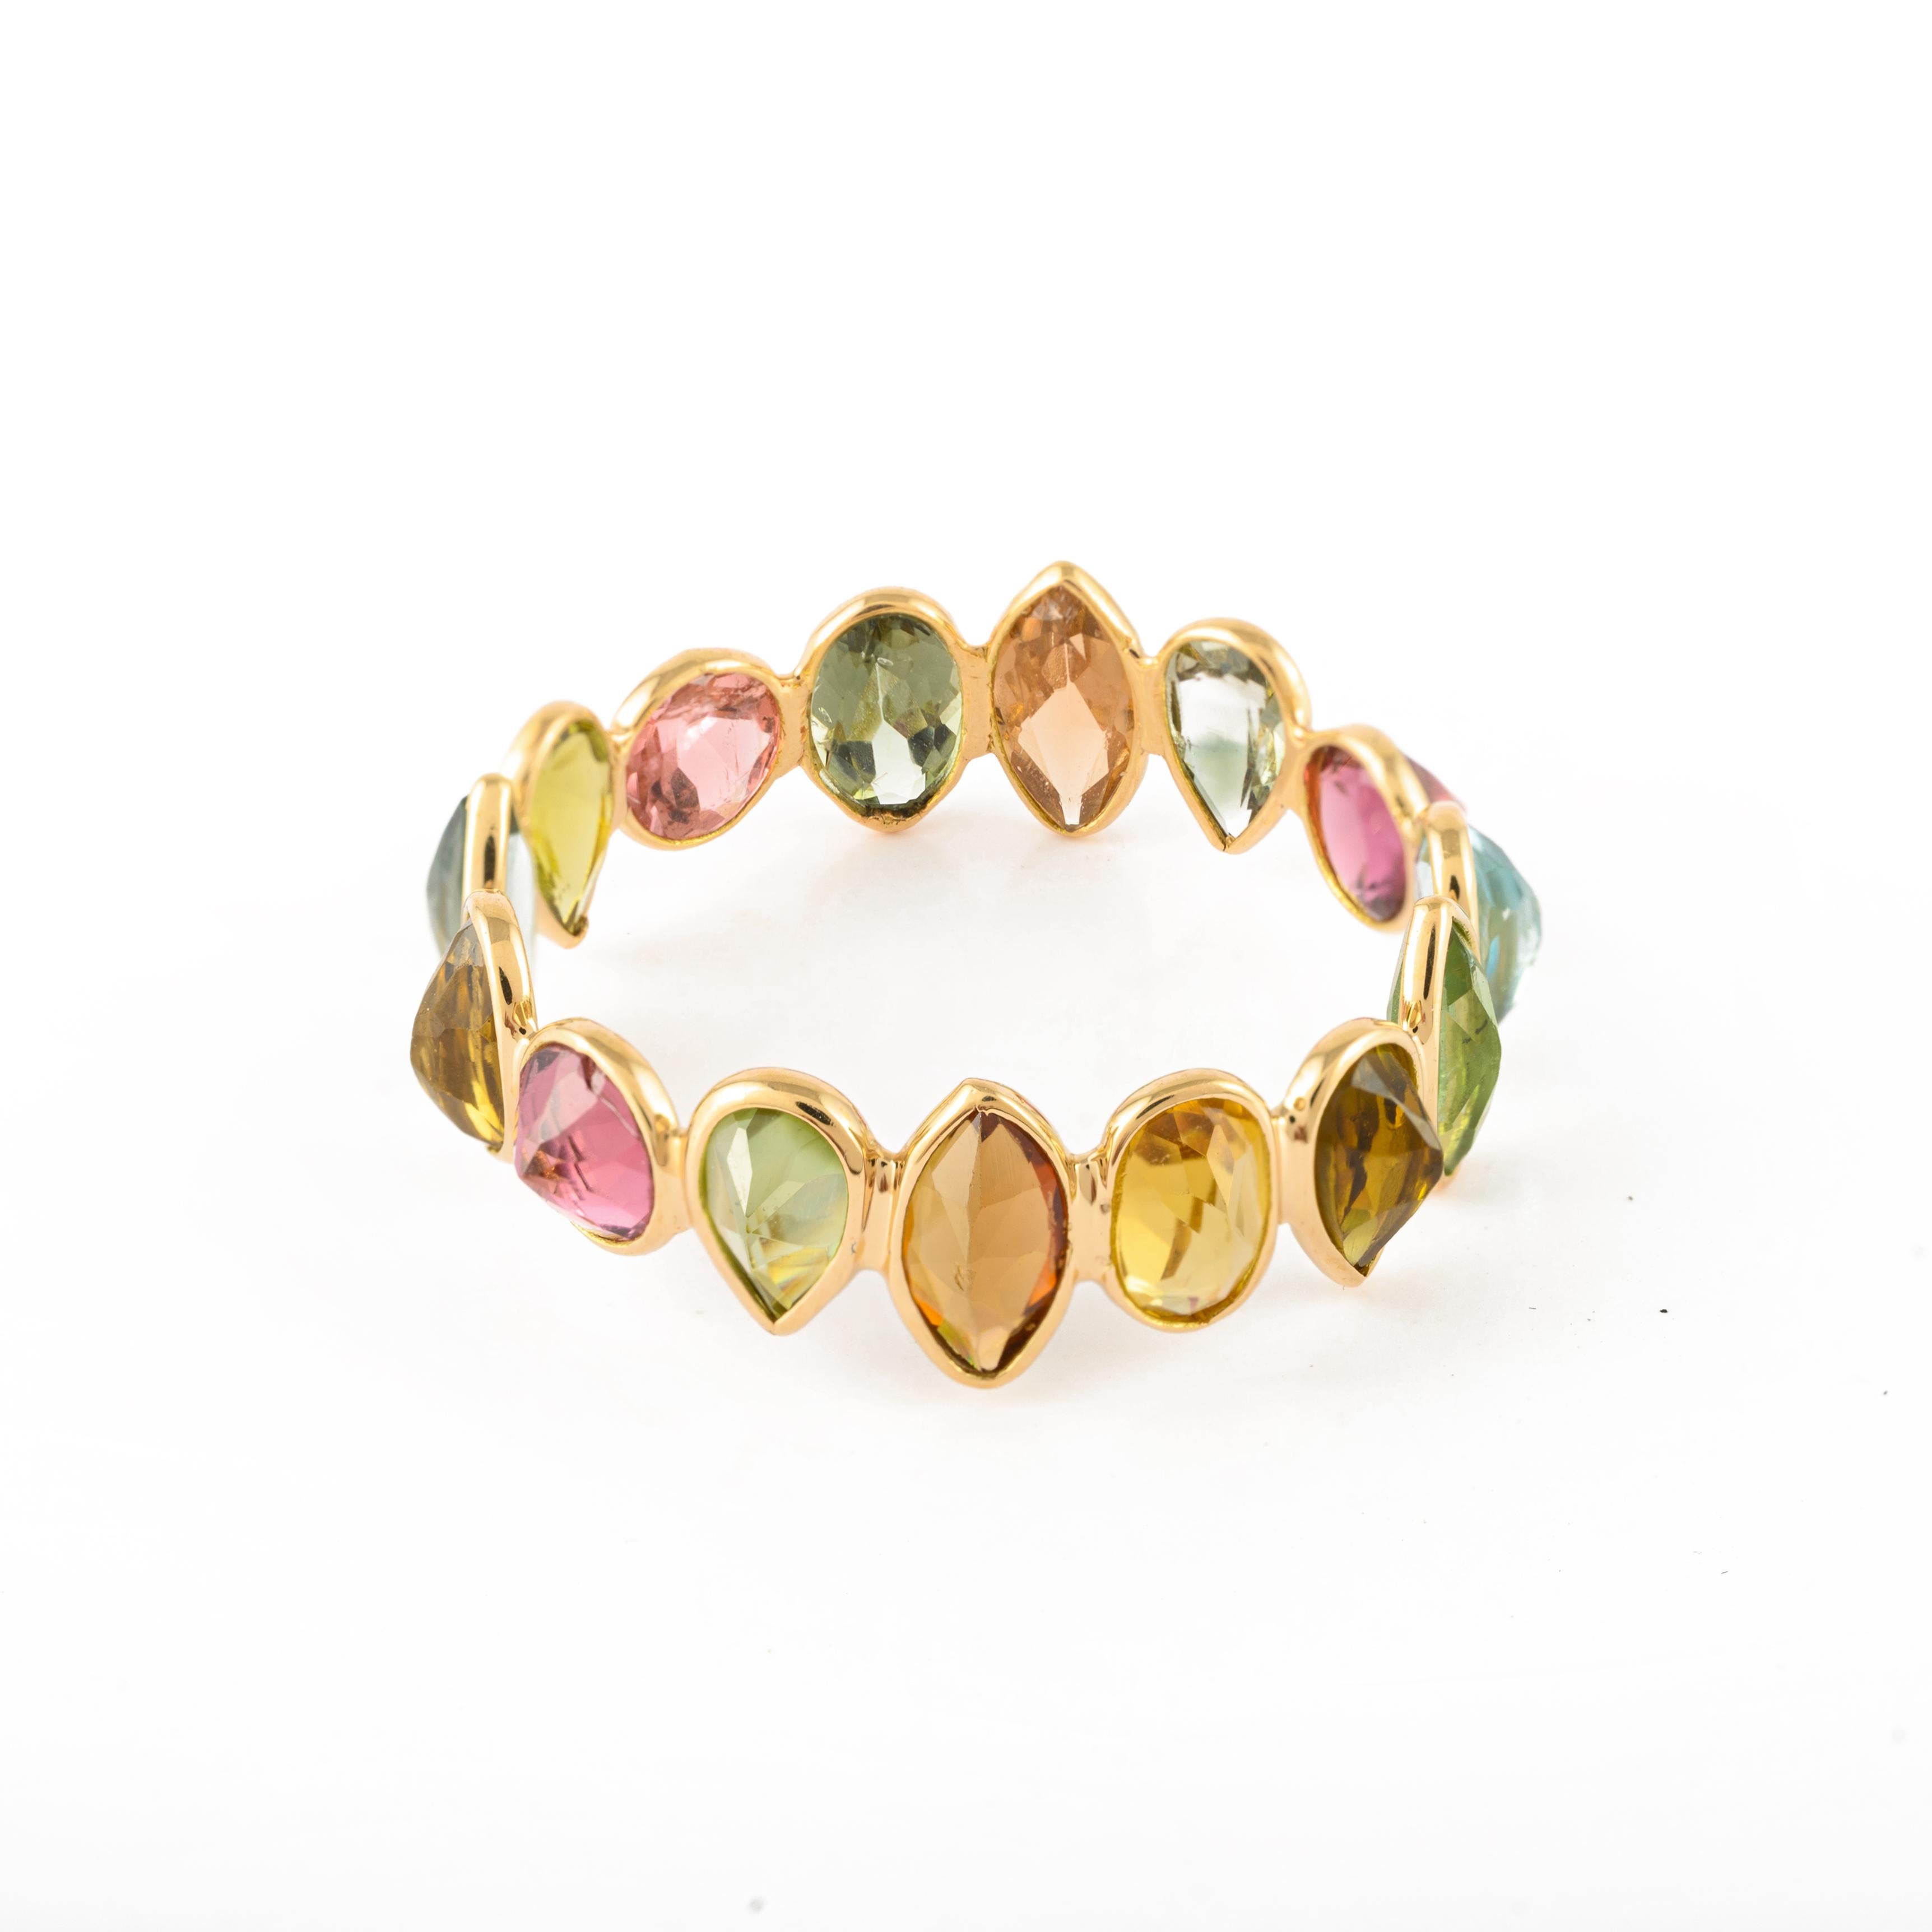 For Sale:  Elegant 3.64ct Multi Tourmaline Full Eternity Band Ring in 18k Solid Yellow Gold 7